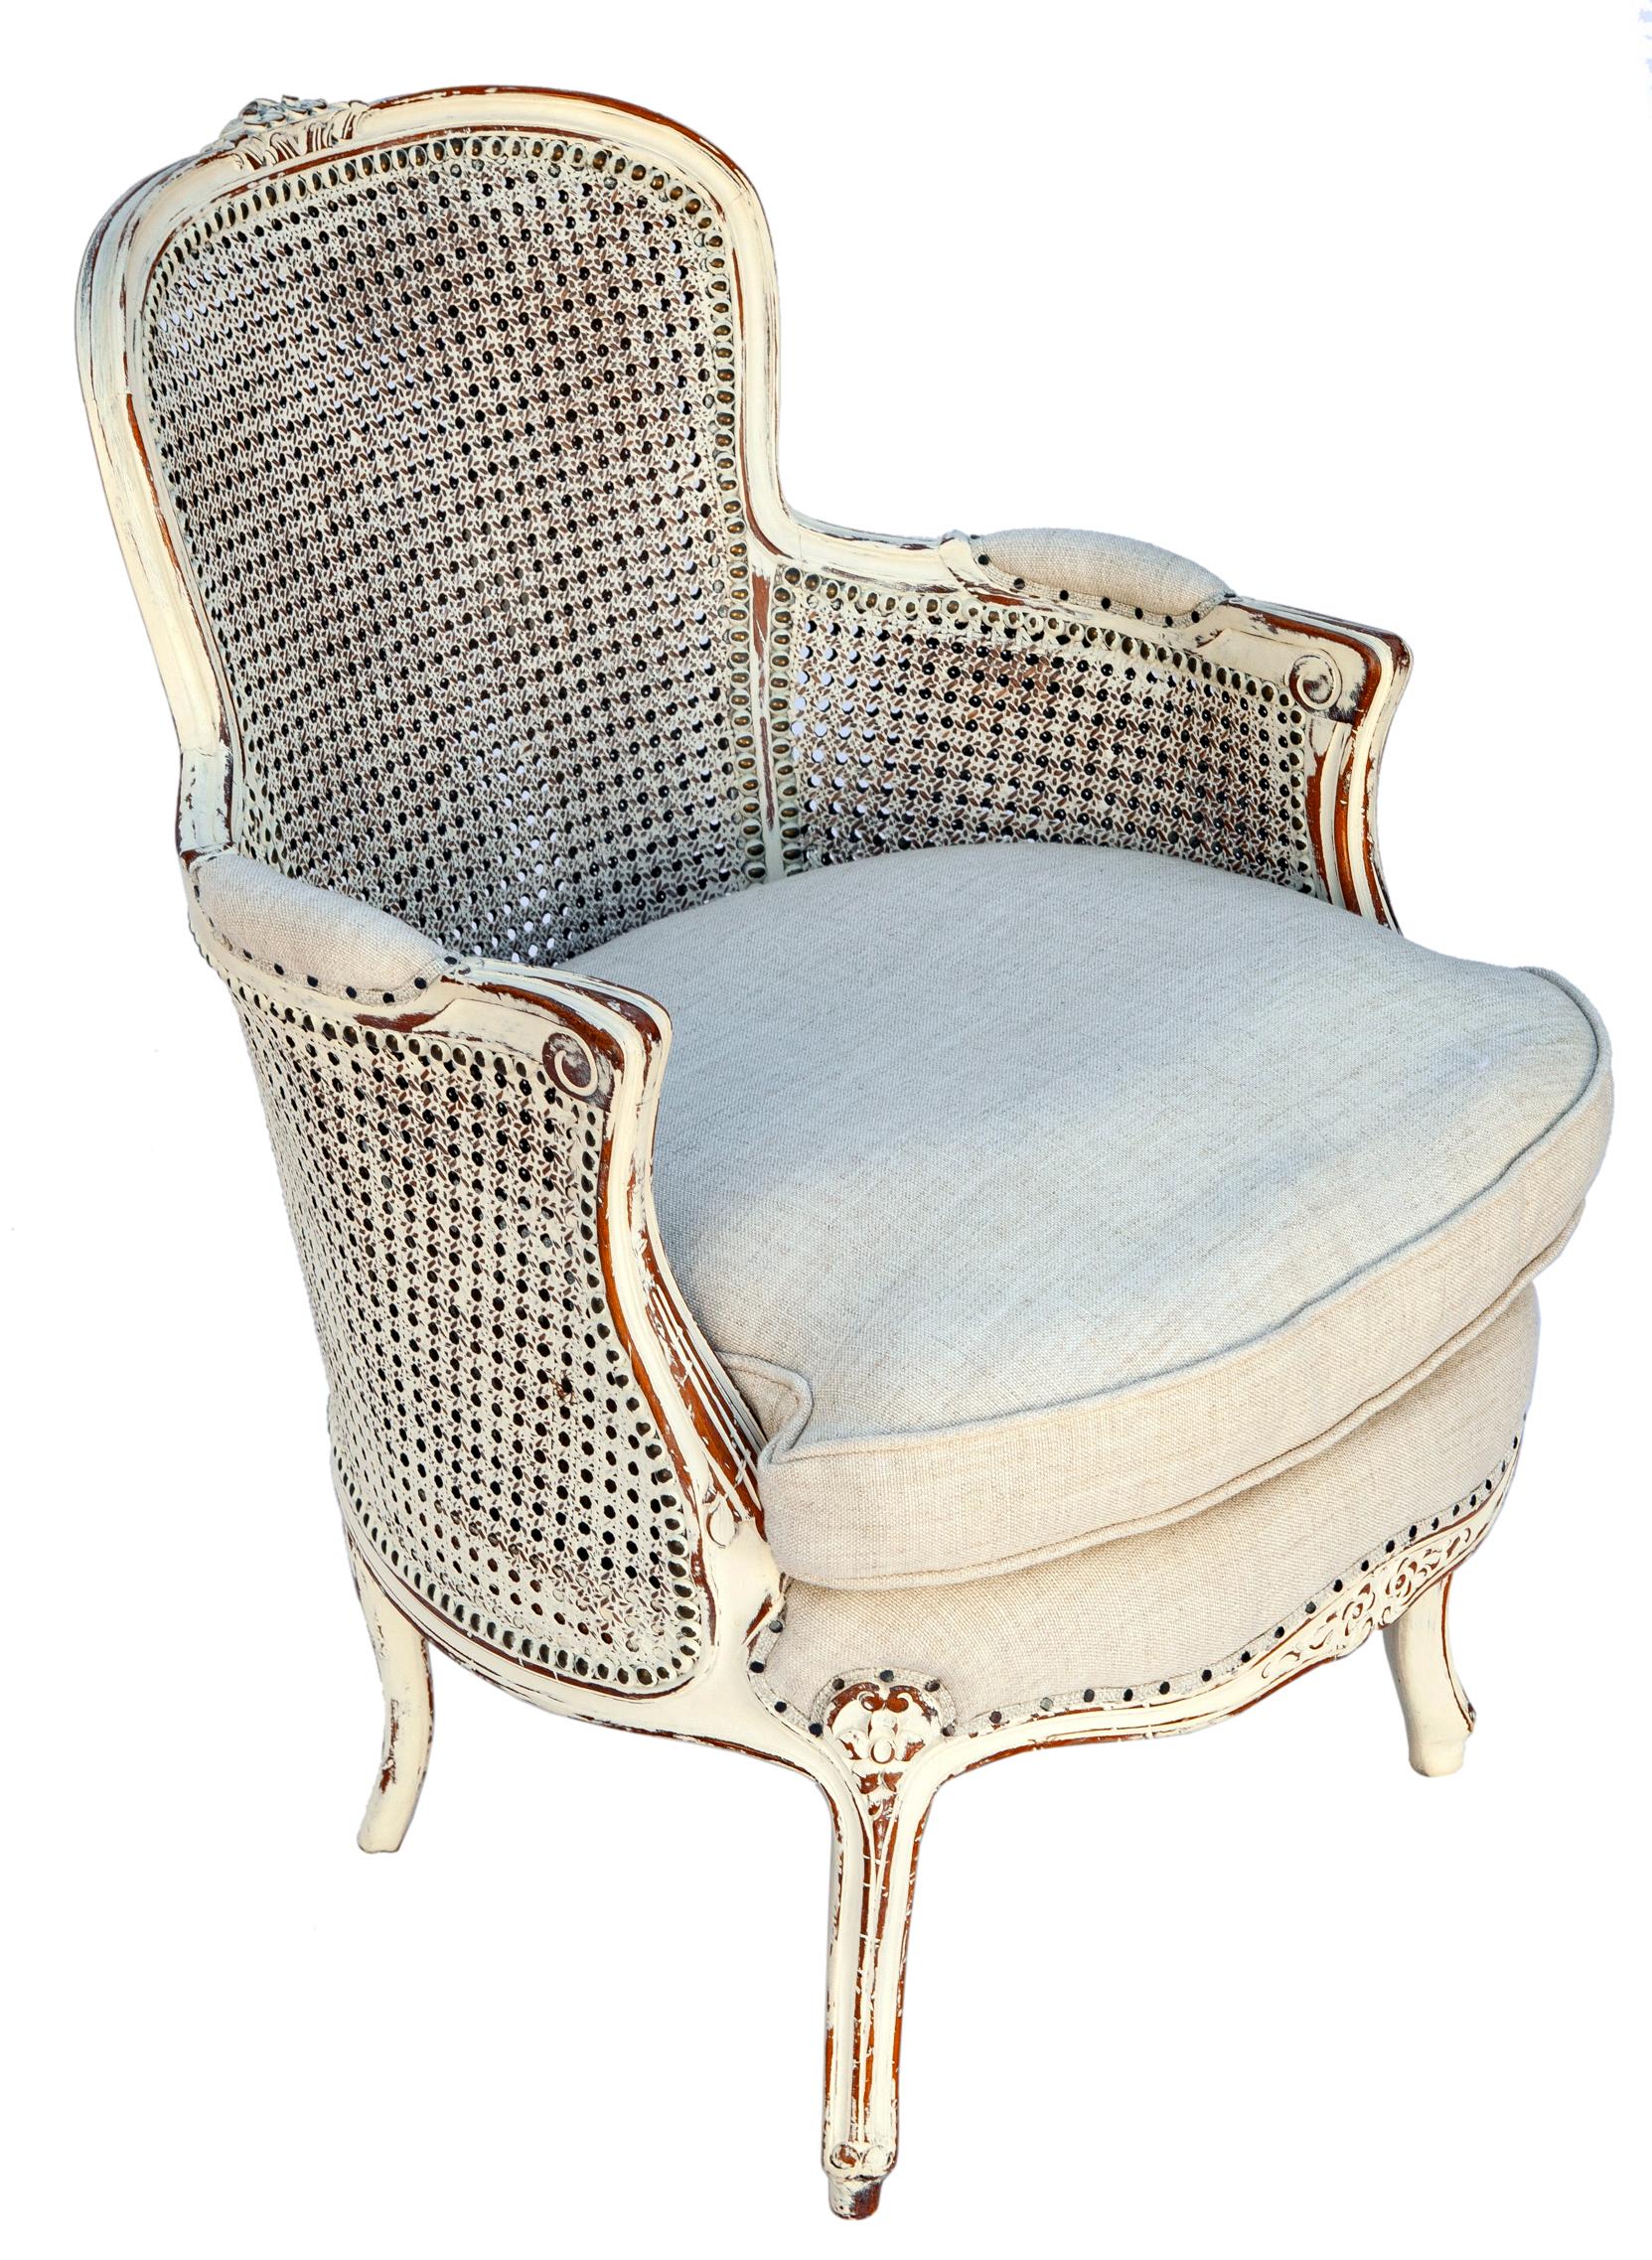 Antique French carved armchair with double caned back and side panels. 
Floral rosettes at the top, bottom, apron & legs. 
Double-caned, hand-carved with new paint.
New linen upholstery in Italian linen blend down/feather cushion.
Seat to floor